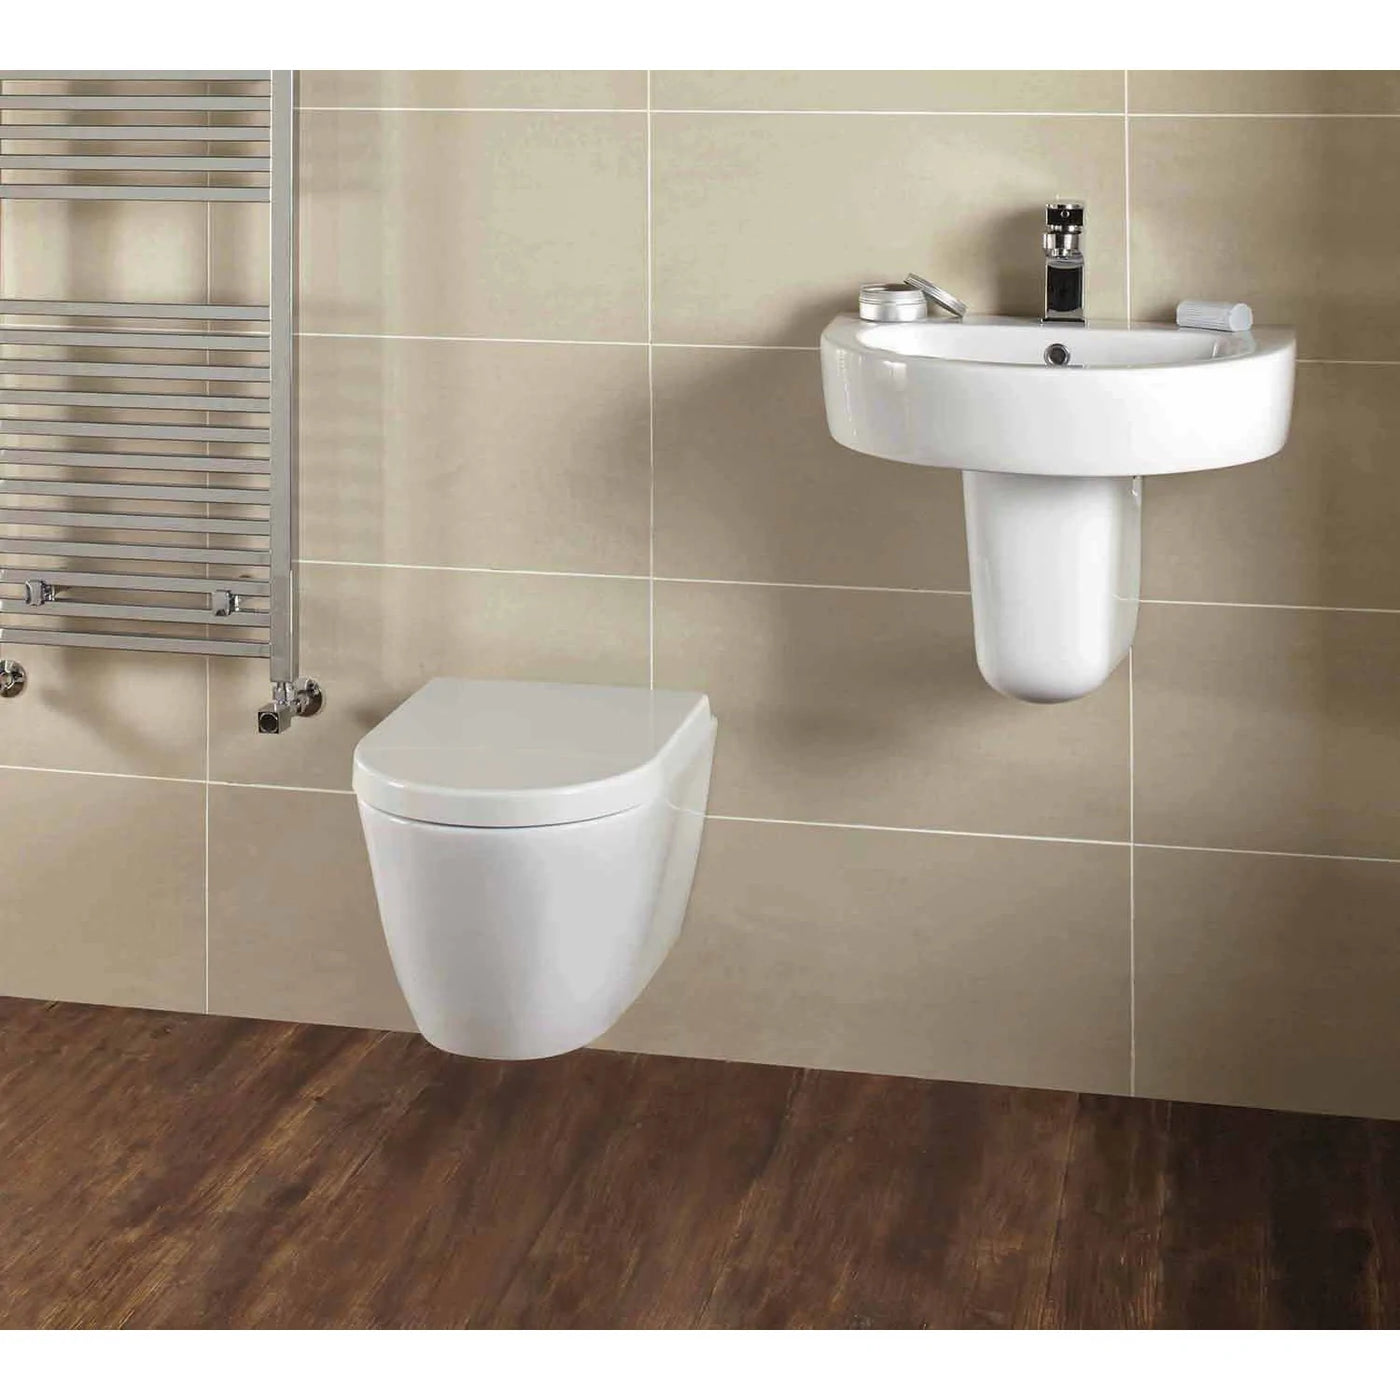 Frontline Emme Wall-Hung Toilet with Soft-Close Seat - Letta London - 